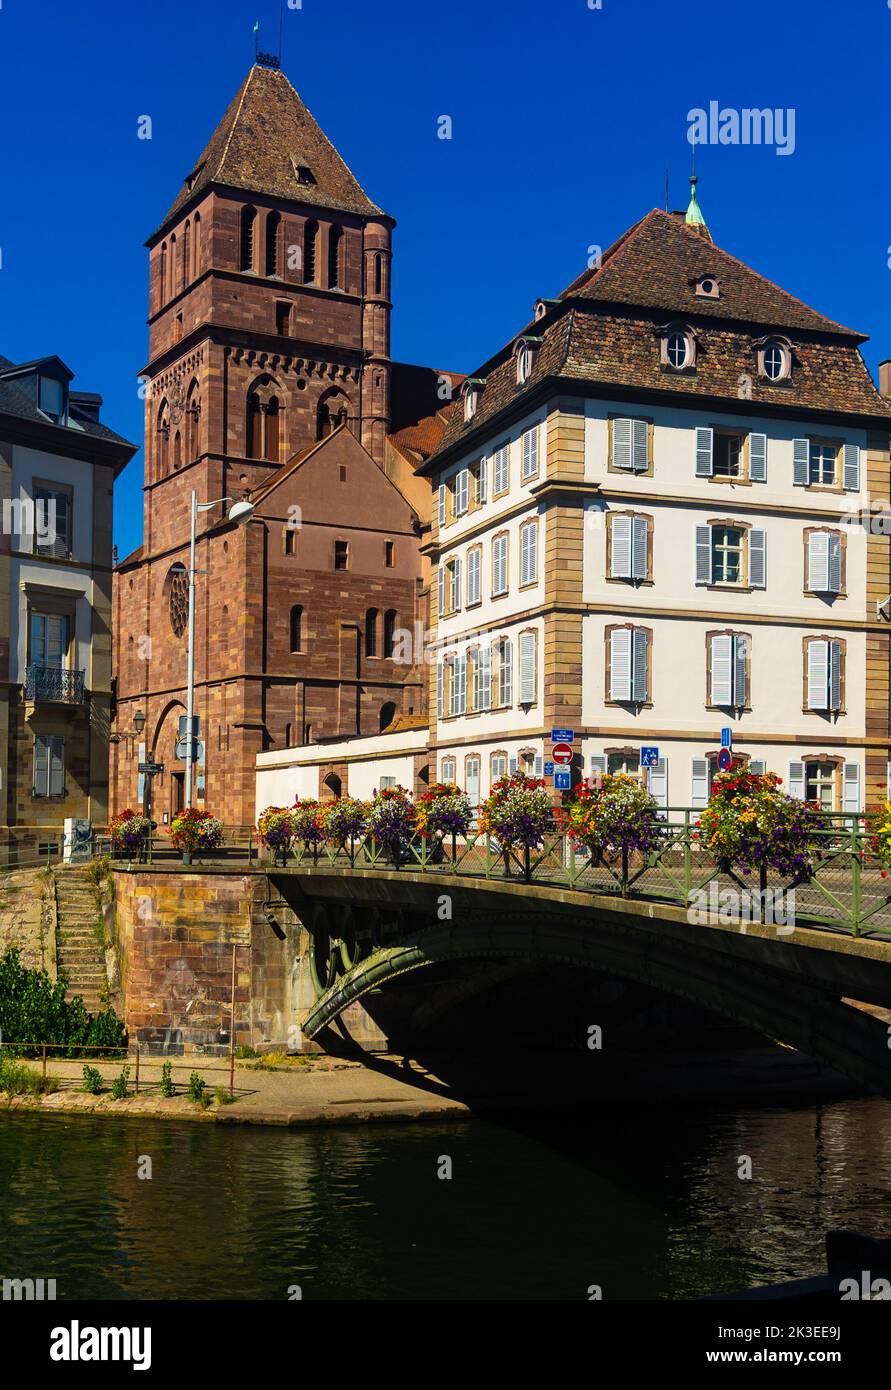 Strasbourg cityscape overlooking St Thomas Church on bank of Ill river Stock Photo